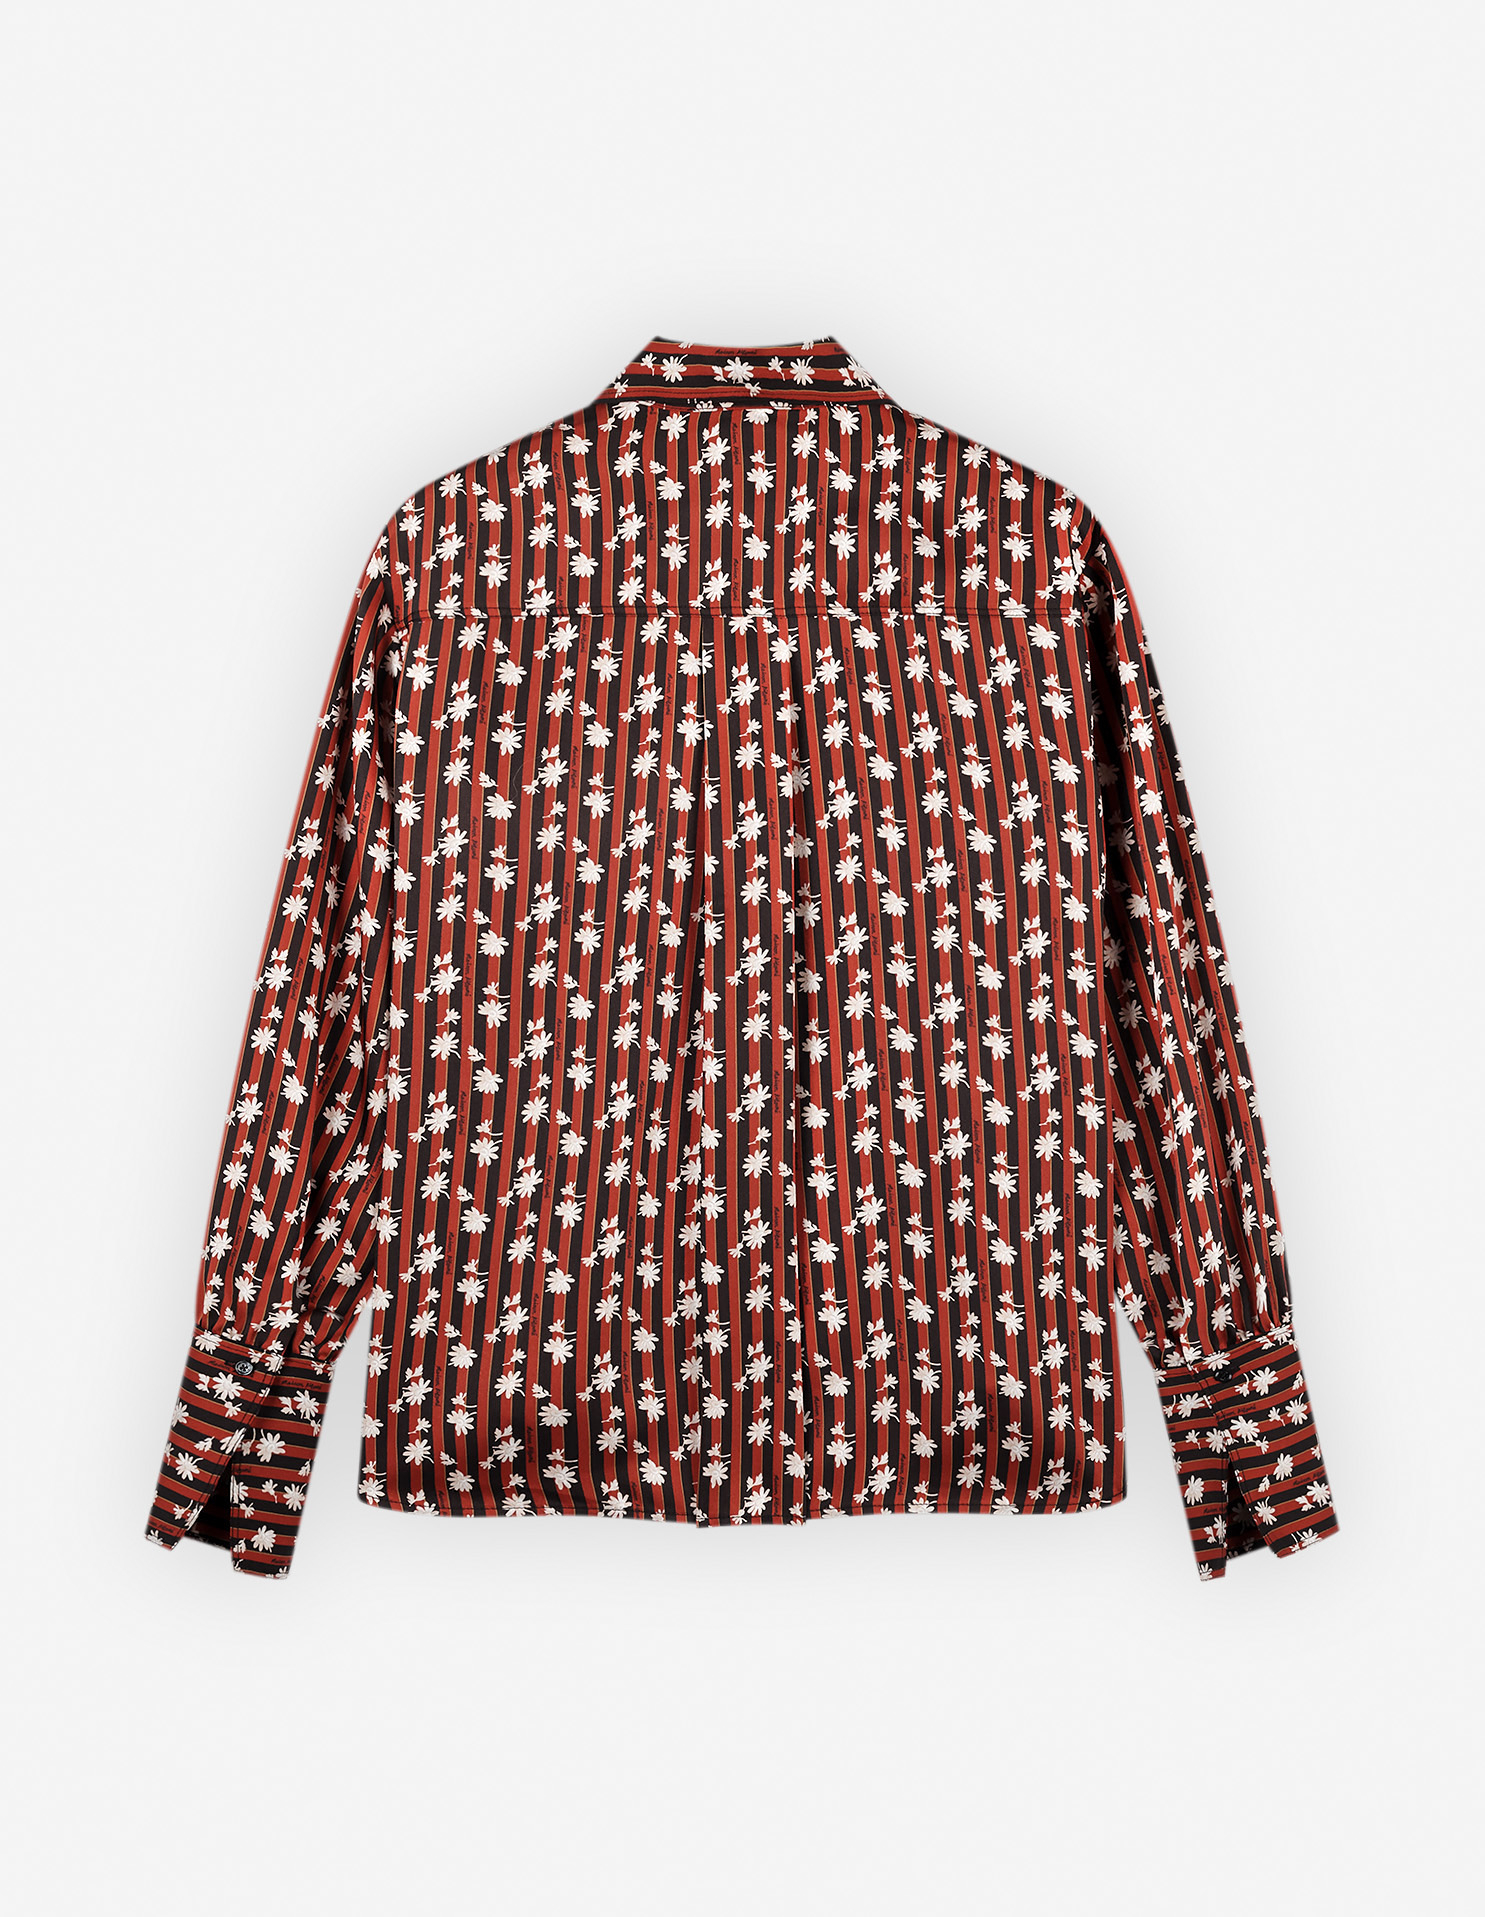 BOXY SHIRT WITH CONCEALED PLACKET IN FLORAL STRIPE PRINTED